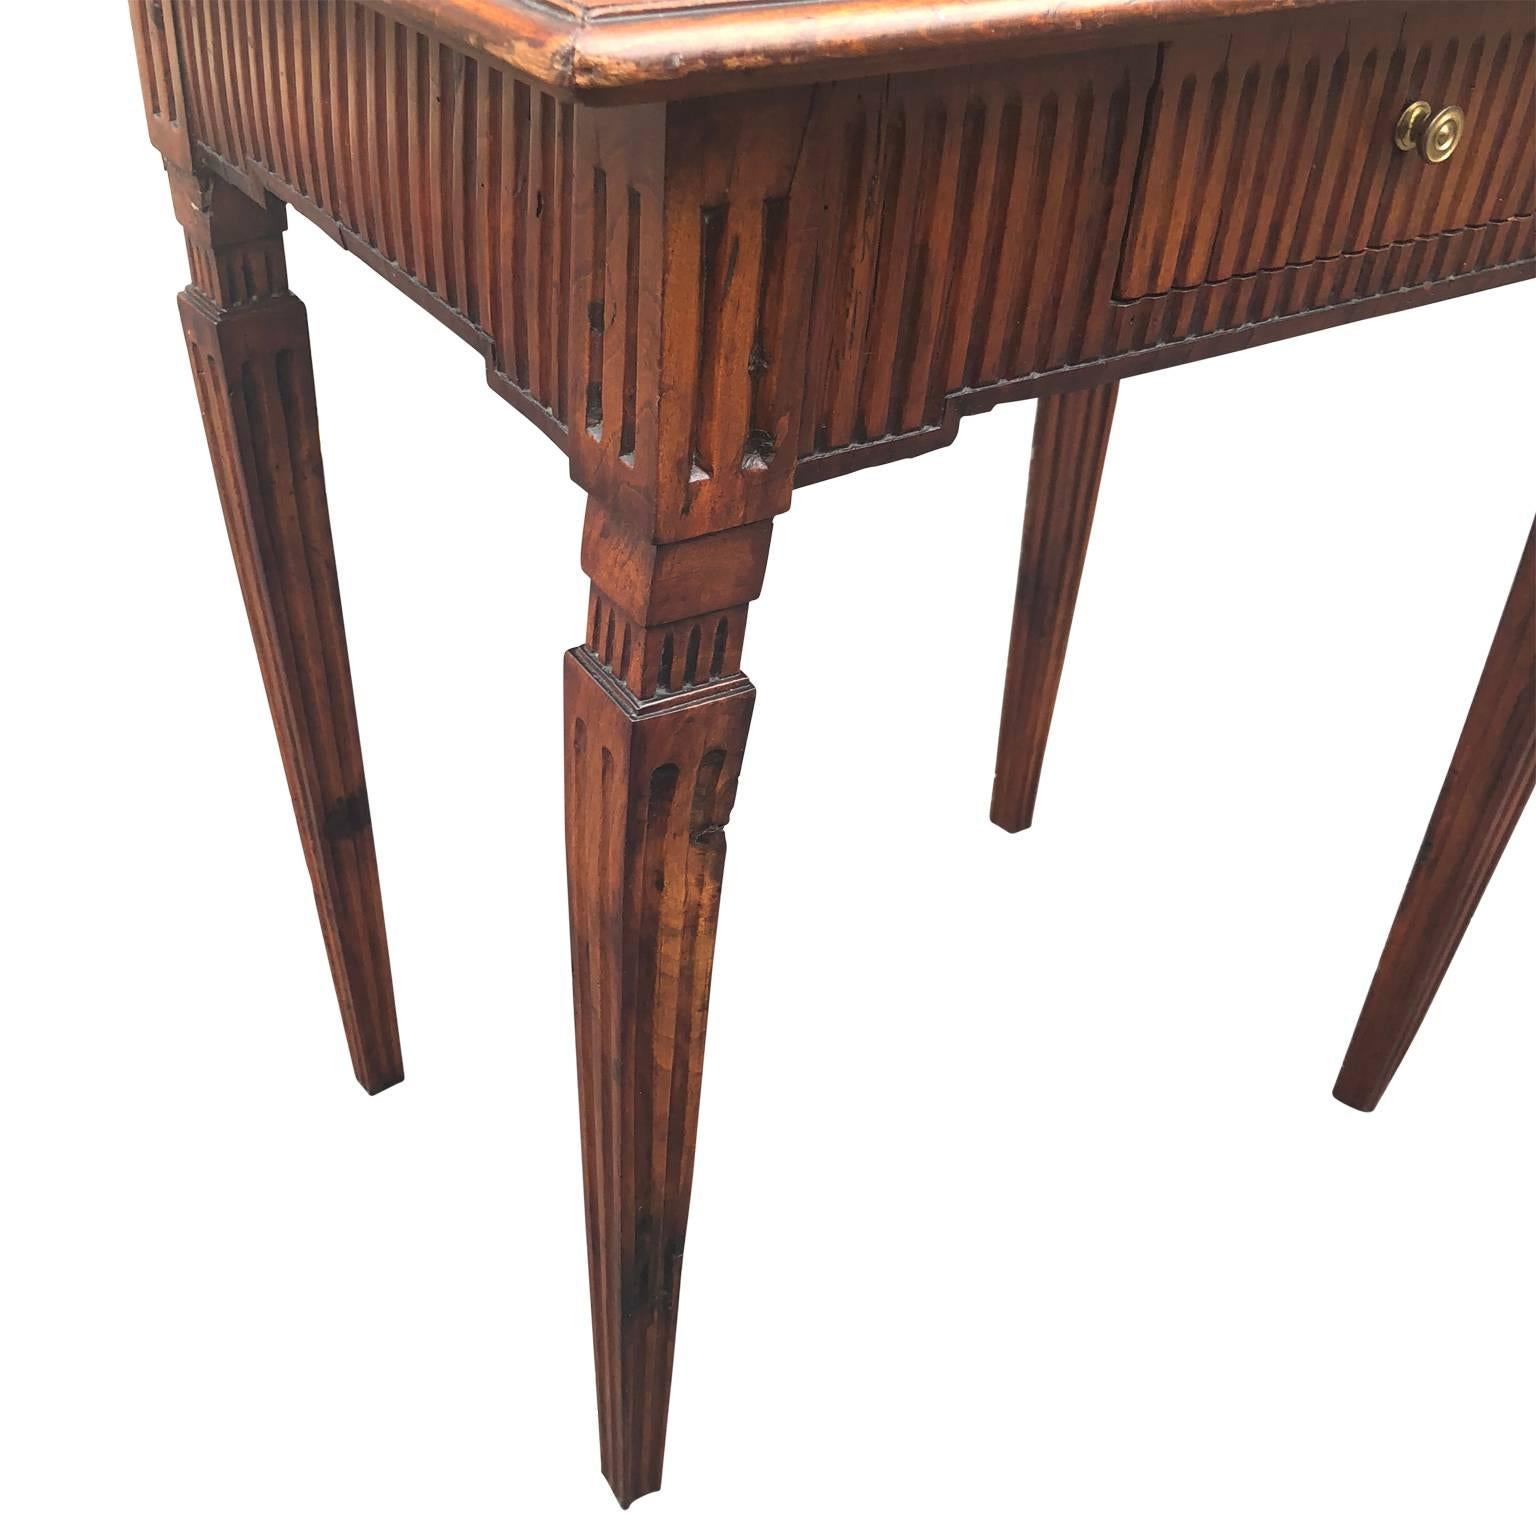 Louis XVI French 18th Century Table With Fluted Apron And Legs For Sale